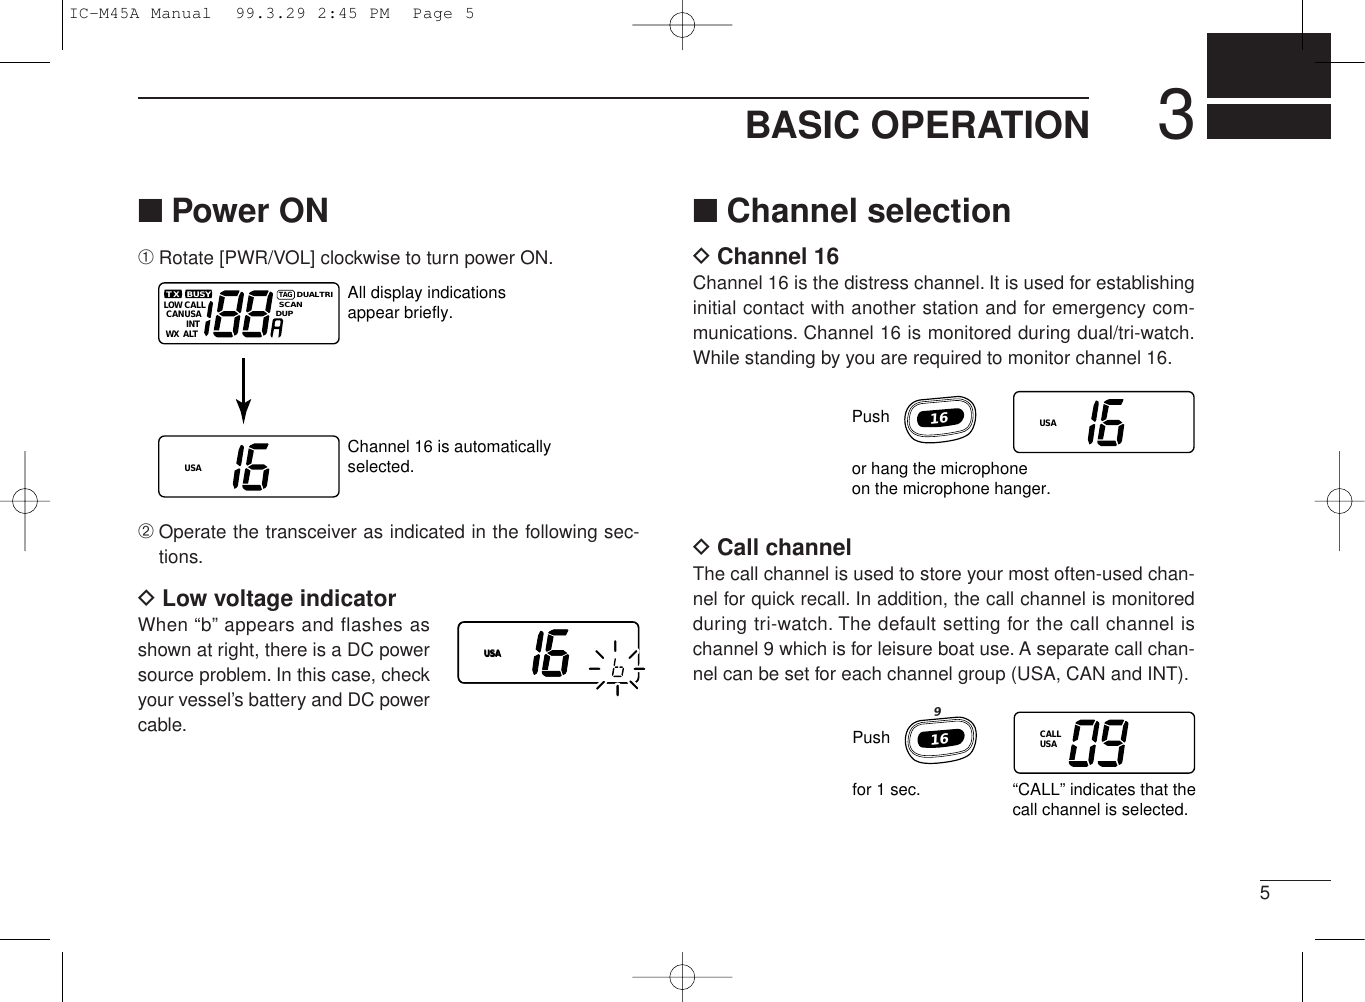 53BASIC OPERATION■Power ON➀Rotate [PWR/VOL] clockwise to turn power ON.➁Operate the transceiver as indicated in the following sec-tions.DLow voltage indicatorWhen “b” appears and flashes asshown at right, there is a DC powersource problem. In this case, checkyour vessel’s battery and DC powercable.LOW CALLCANUSAUSAINTALTWXTXTAGDUALSCANDUPTRIBUSY All display indicationsappear briefly.Channel 16 is automaticallyselected.■Channel selectionDChannel 16Channel 16 is the distress channel. It is used for establishinginitial contact with another station and for emergency com-munications. Channel 16 is monitored during dual/tri-watch.While standing by you are required to monitor channel 16.DCall channelThe call channel is used to store your most often-used chan-nel for quick recall. In addition, the call channel is monitoredduring tri-watch. The default setting for the call channel ischannel 9 which is for leisure boat use. A separate call chan-nel can be set for each channel group (USA, CAN and INT).USAUSAUSAPushor hang the microphoneon the microphone hanger.16Pushfor 1 sec. “CALL” indicates that thecall channel is selected.169CALLUSAIC-M45A Manual  99.3.29 2:45 PM  Page 5